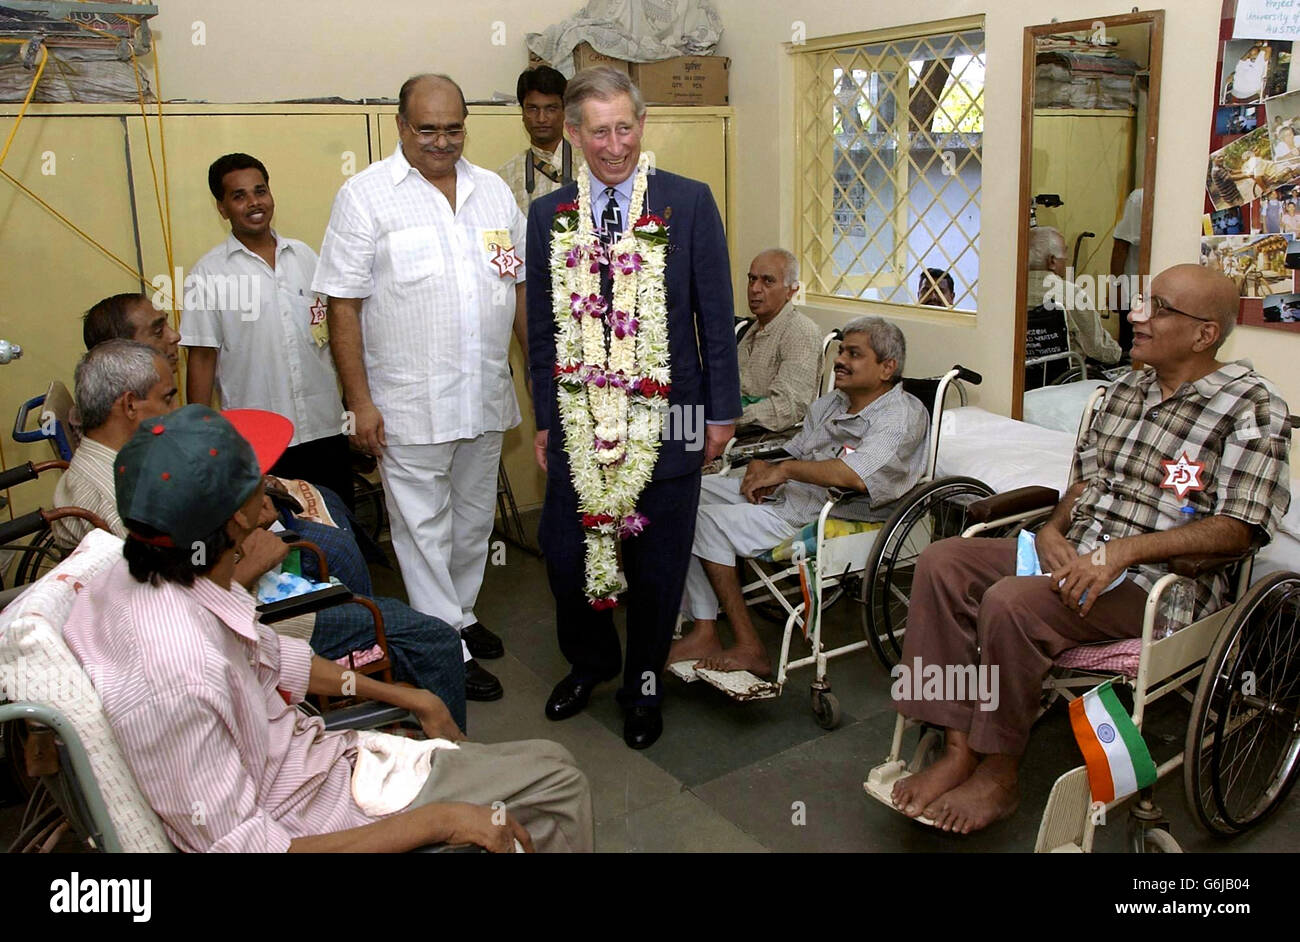 Prince Charles enjoys a joke with some of the residents of the Cheshire Homes for the disabled in Mumbai, India. Stock Photo